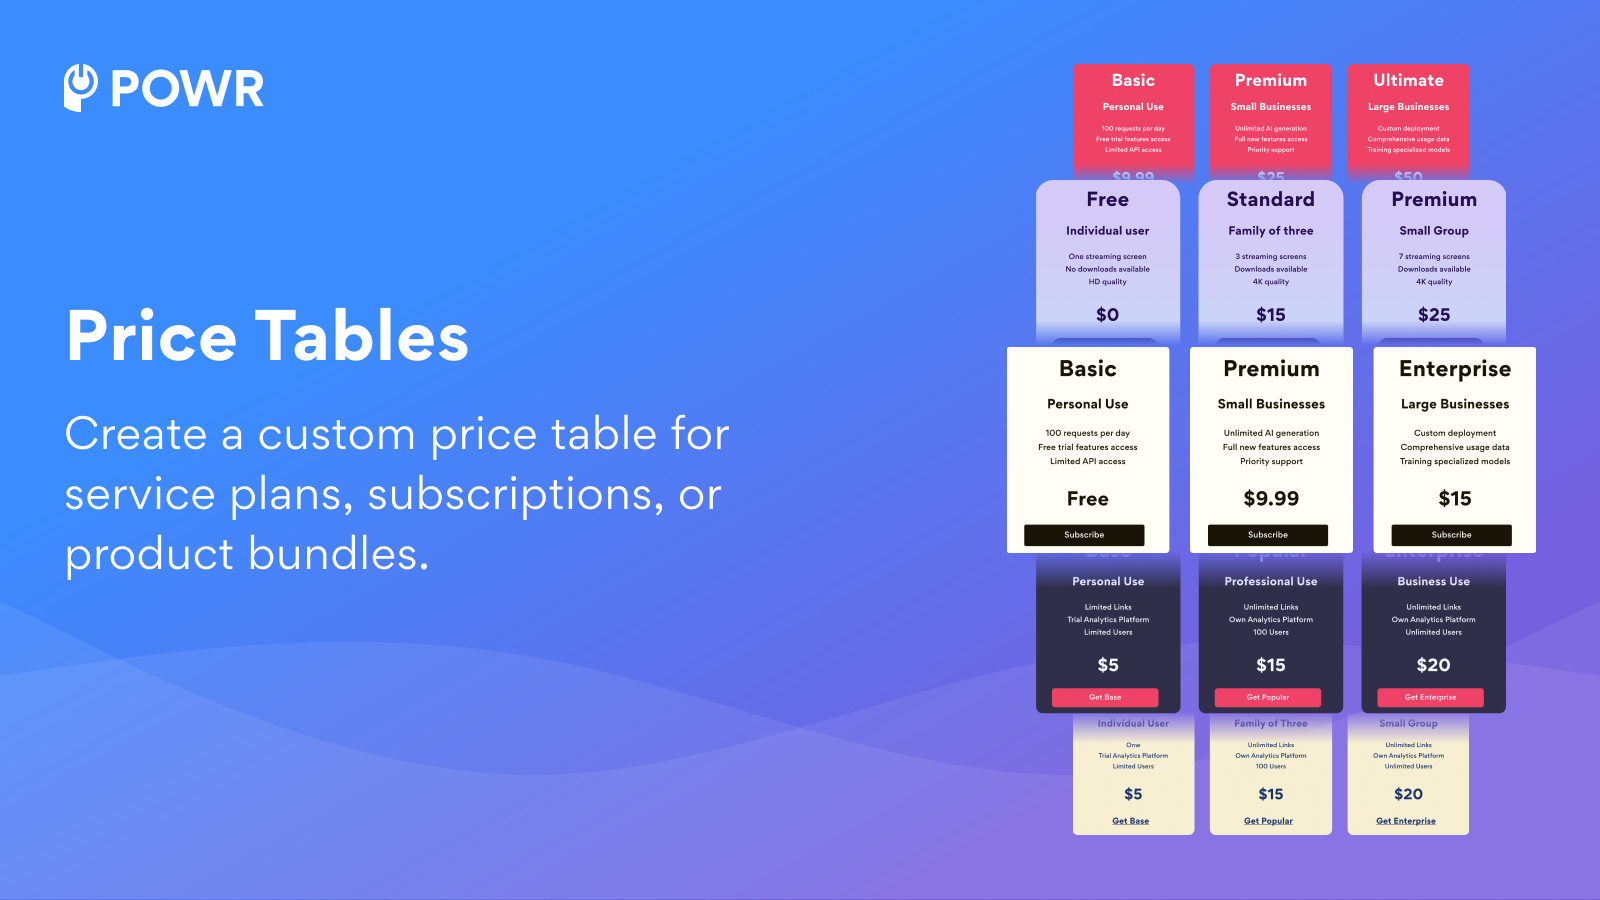 Get quicker buying decisions & more upsells with Price Table Pro